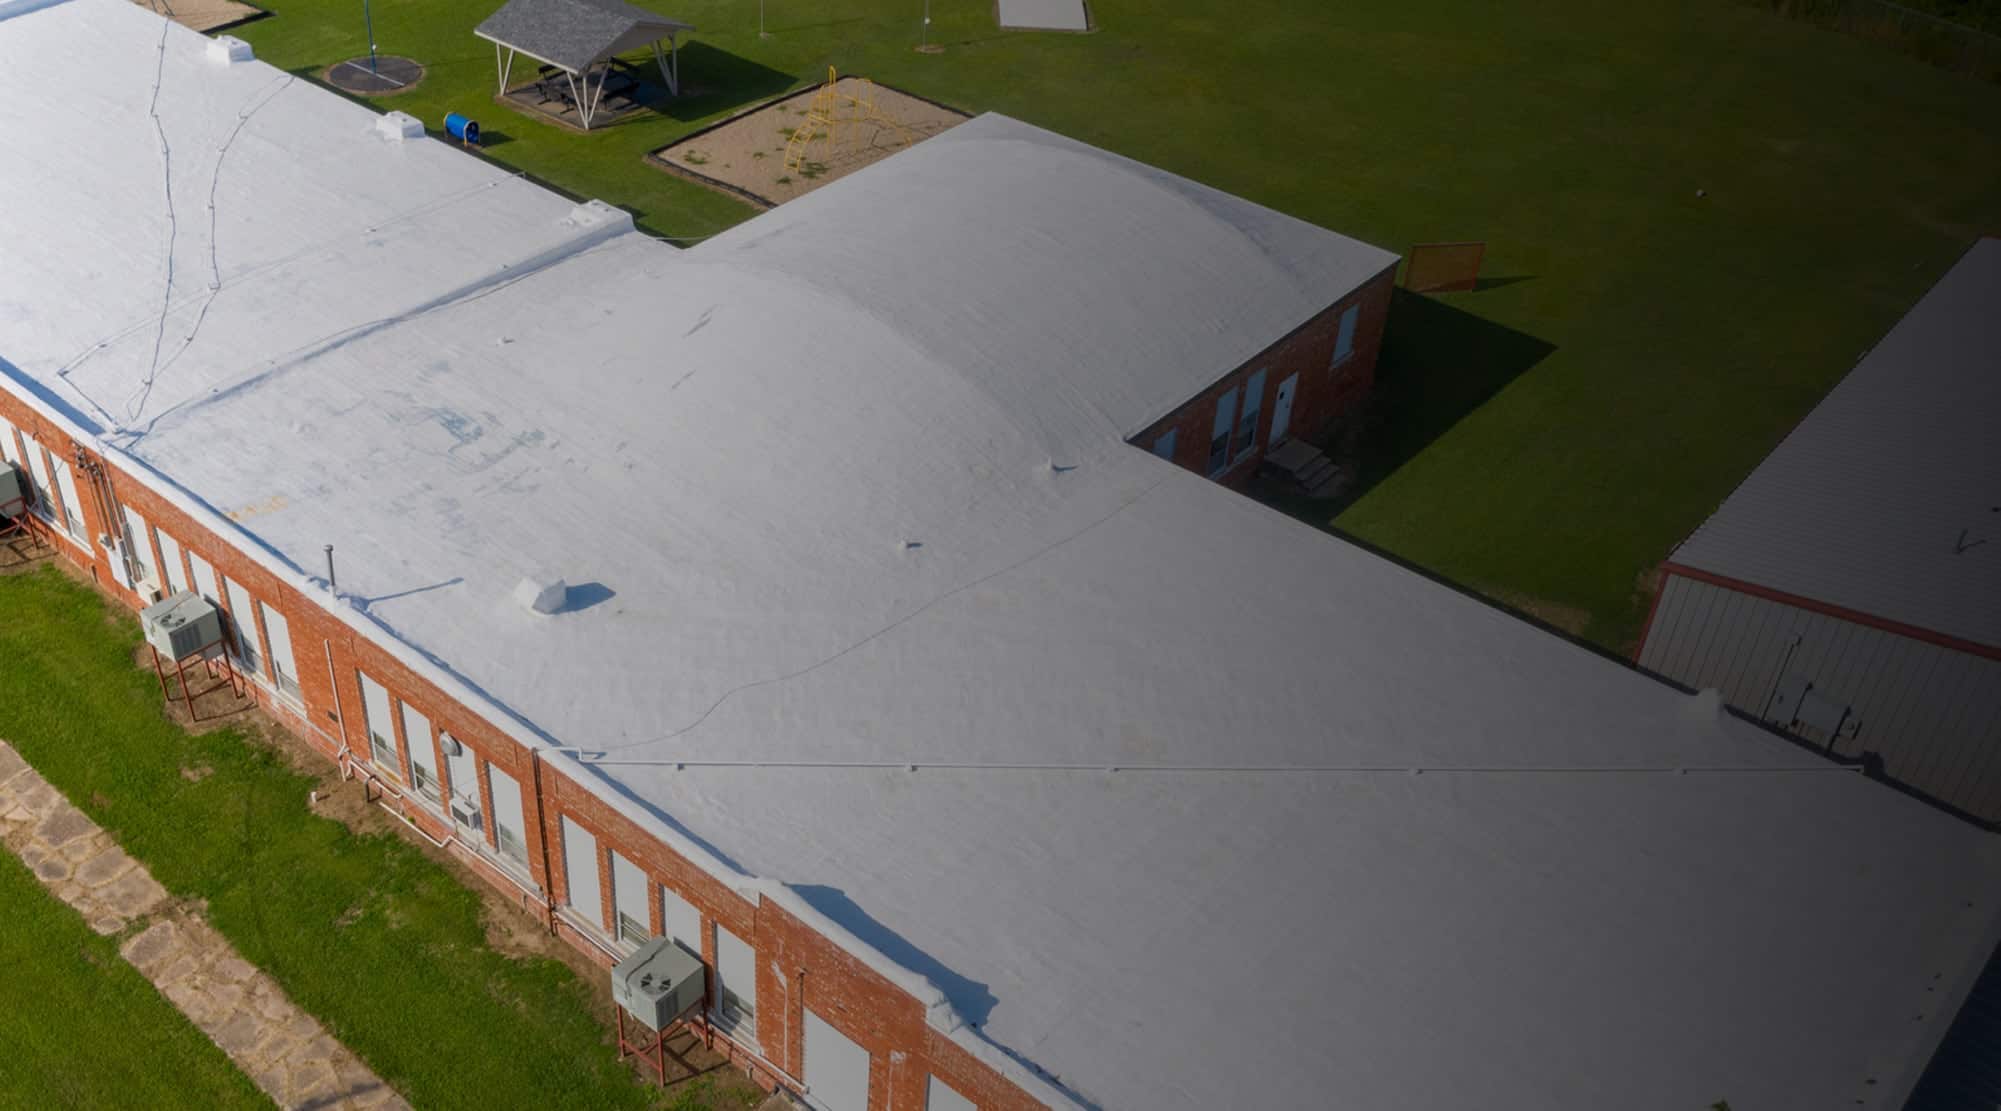 Metal and shingle roofs on school building in Oklahoma